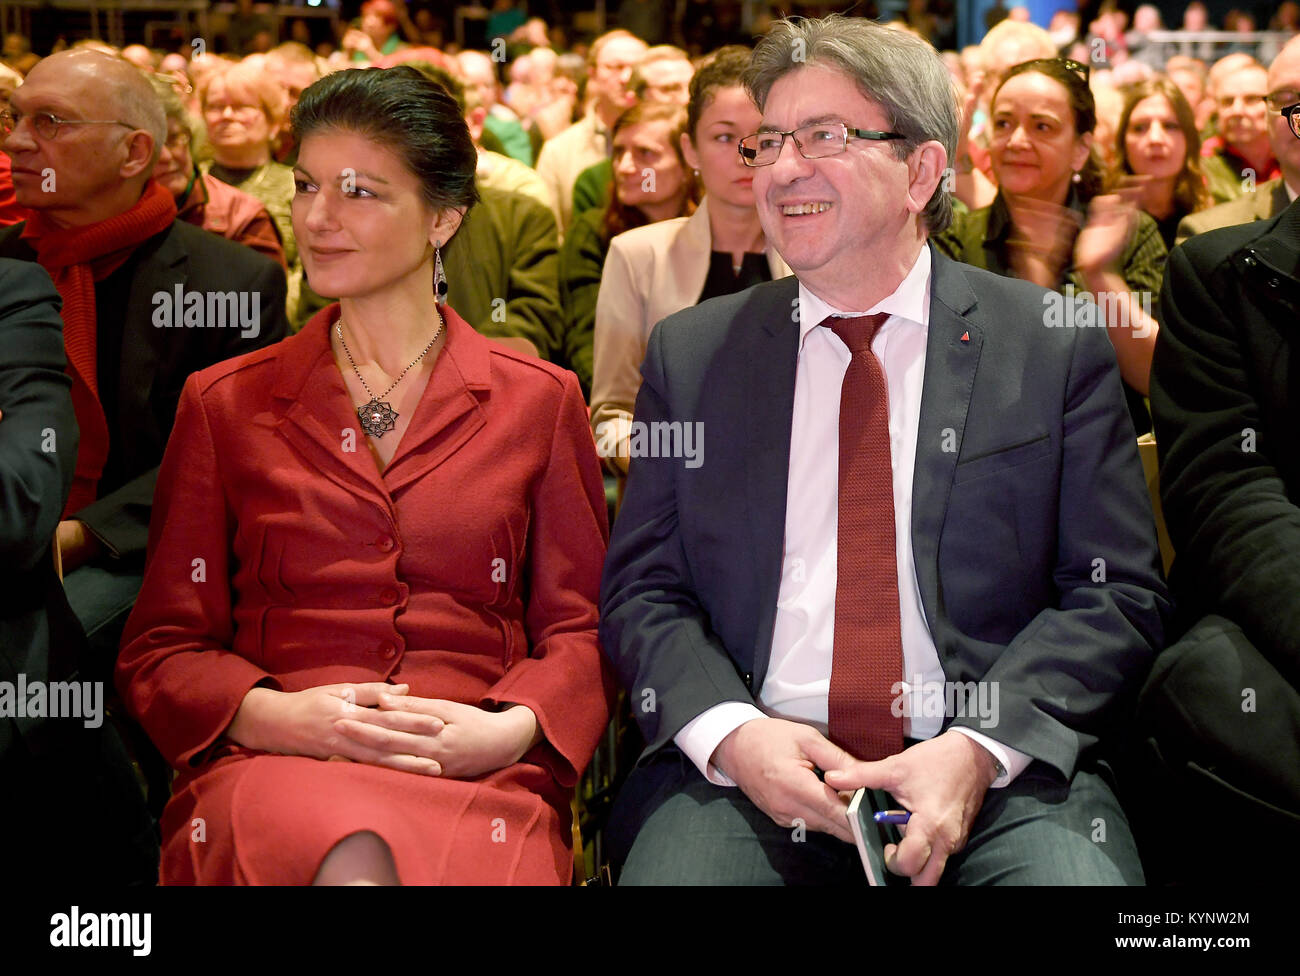 Berlin, Germany. 14th Jan, 2018. The faction leader of the party 'die Linke', Sahra Wagenknecht sits next to French leftist politician Jean-Luc Melenchon (R) at the annual kick-off event 'Aufbruch für soziale Sicherheit' (lit. 'Takeoff for social security') at the Kosmos facility in Berlin, Germany, 14 January 2018. Credit: Britta Pedersen/dpa/Alamy Live News Stock Photo